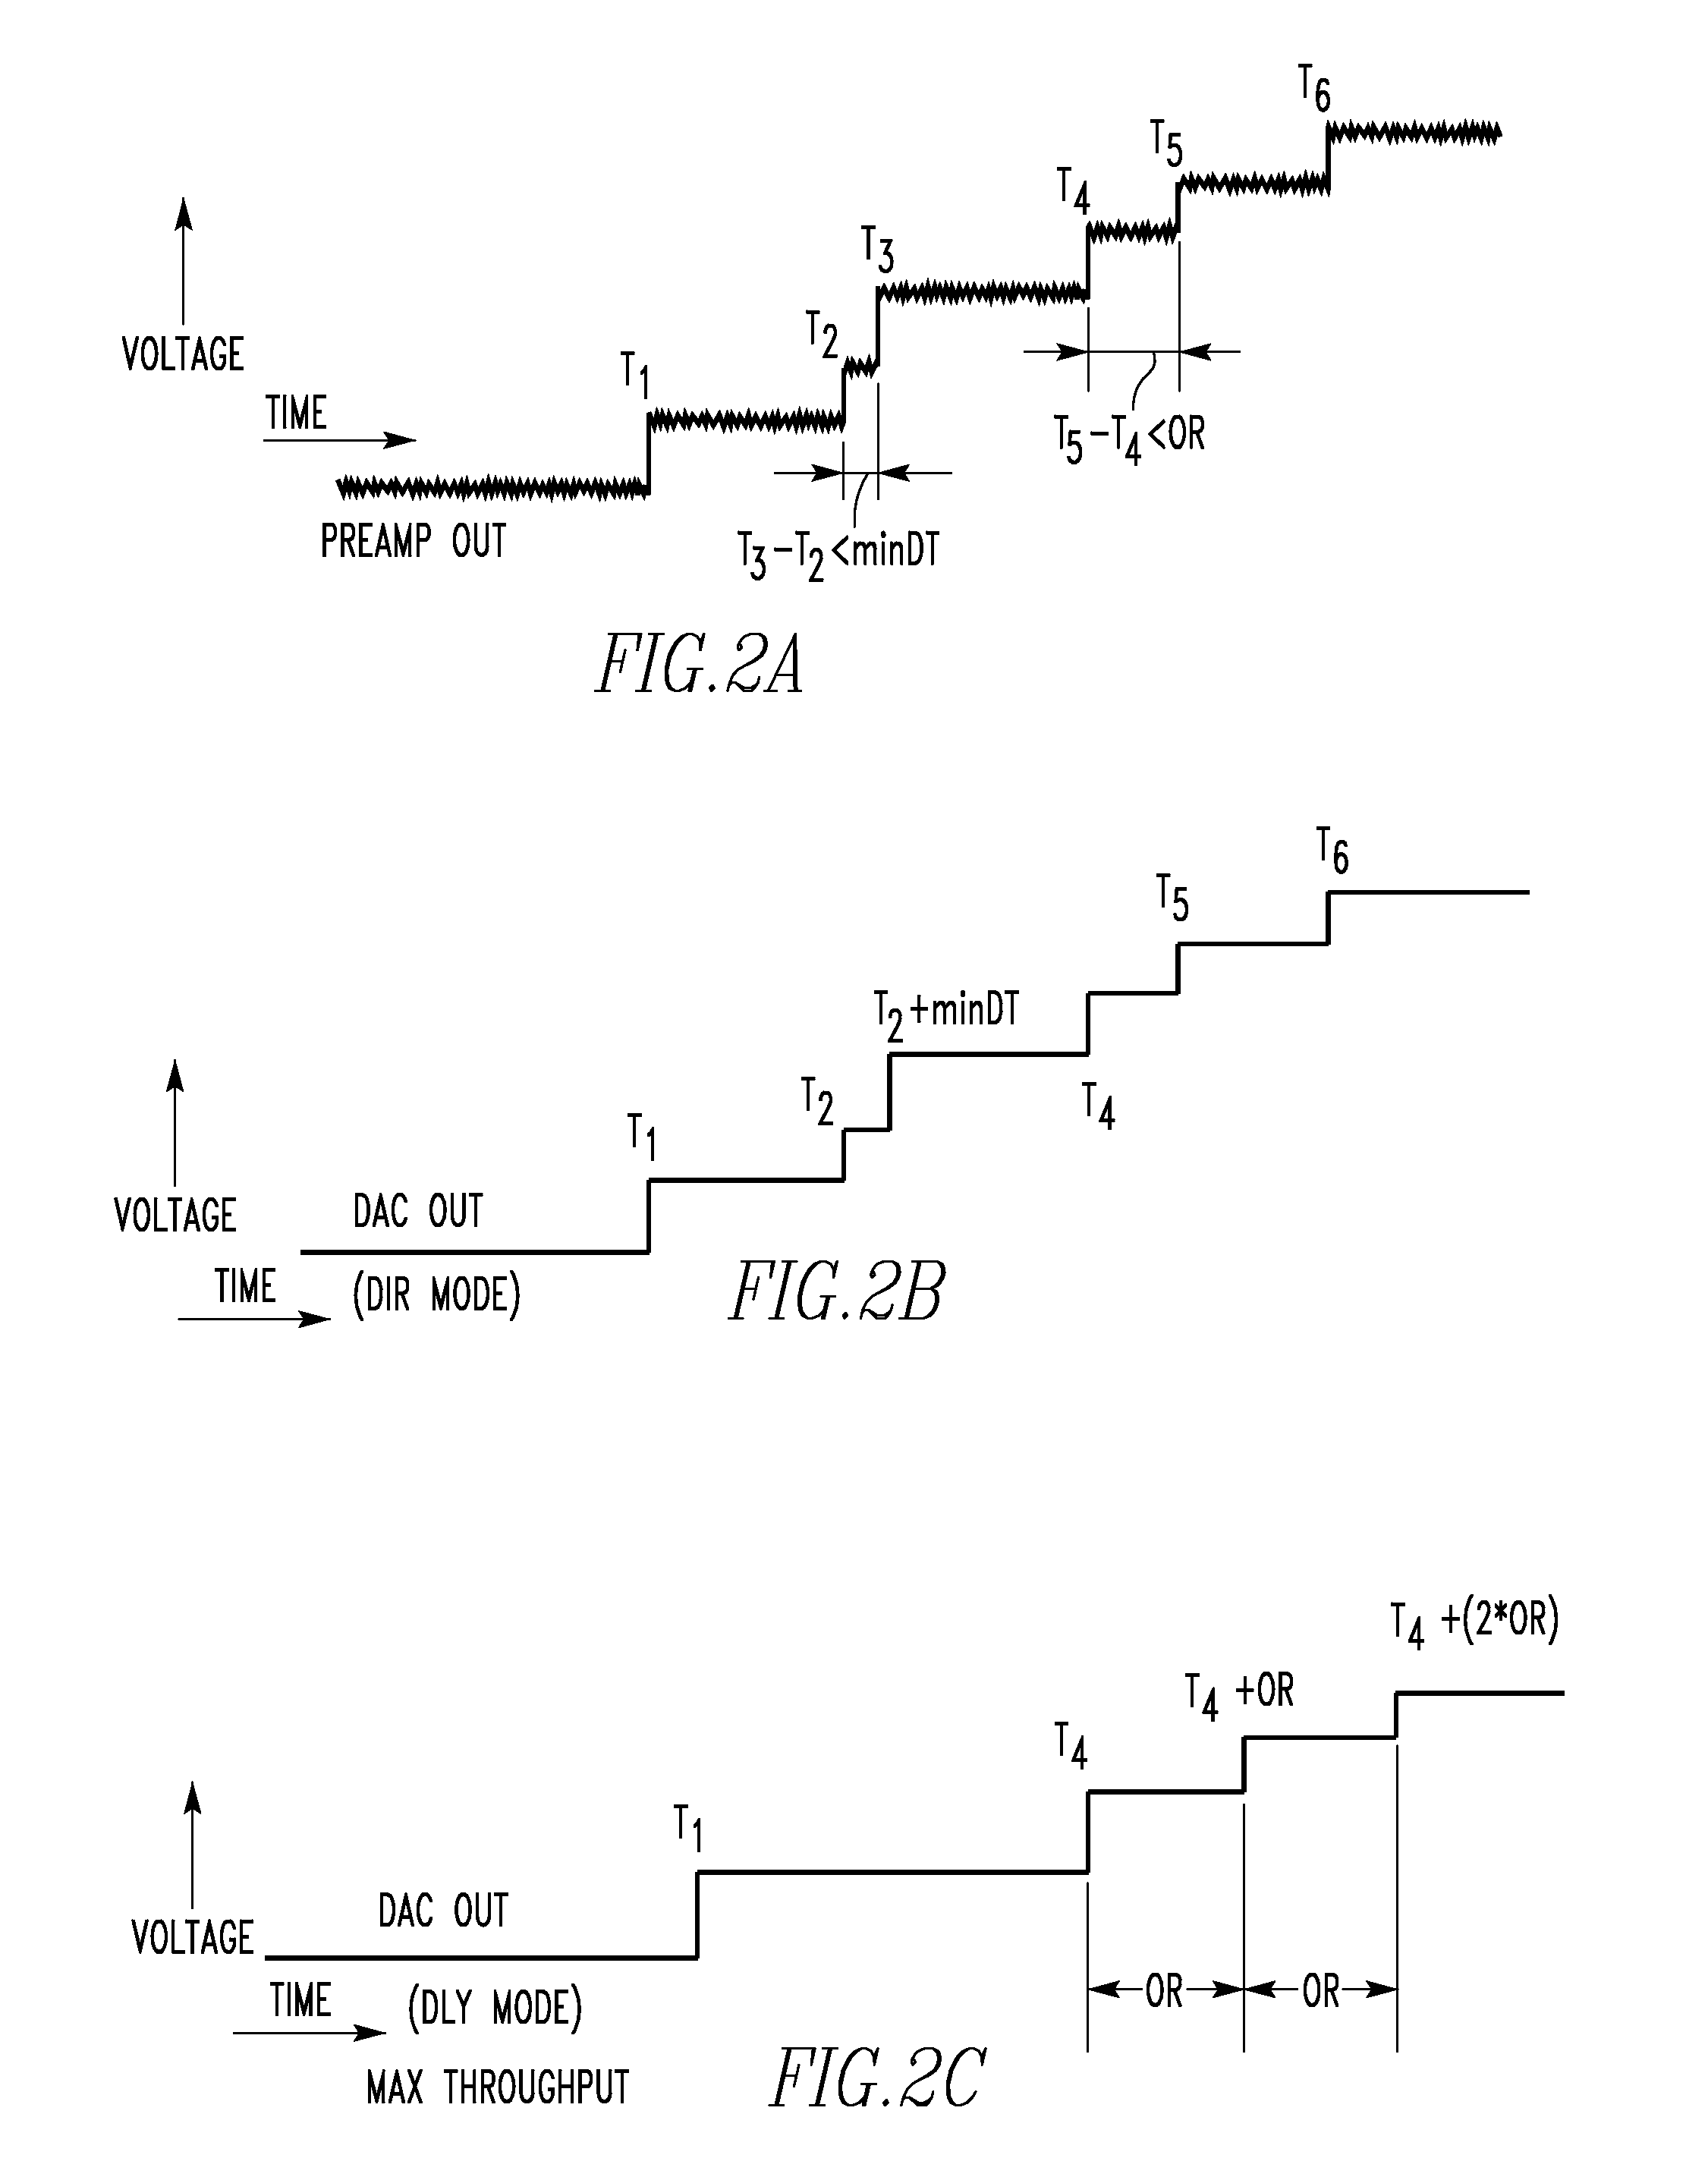 Adapting a high-performance pulse processor to an existing spectrometry system